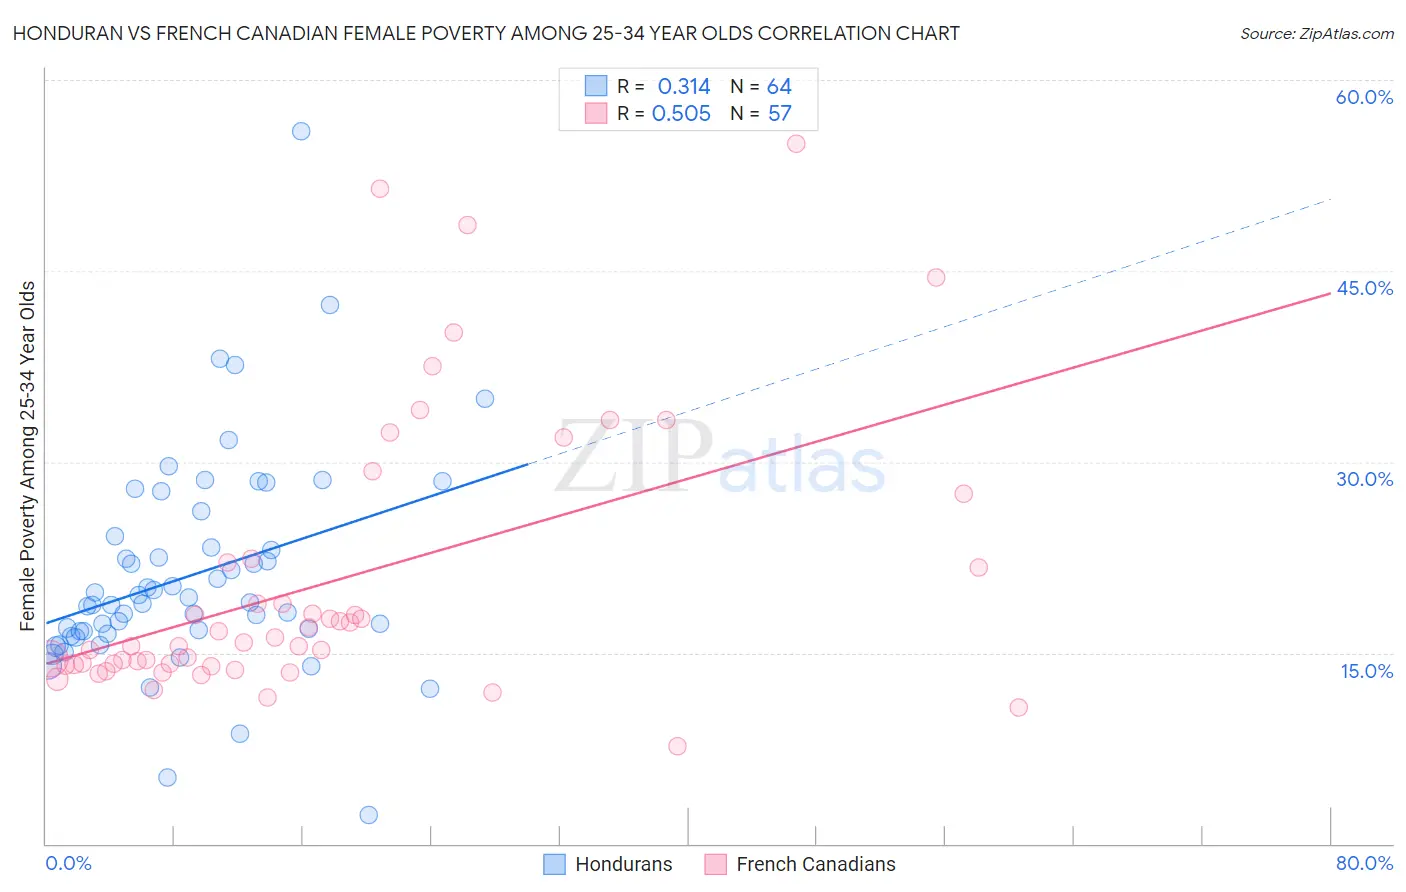 Honduran vs French Canadian Female Poverty Among 25-34 Year Olds